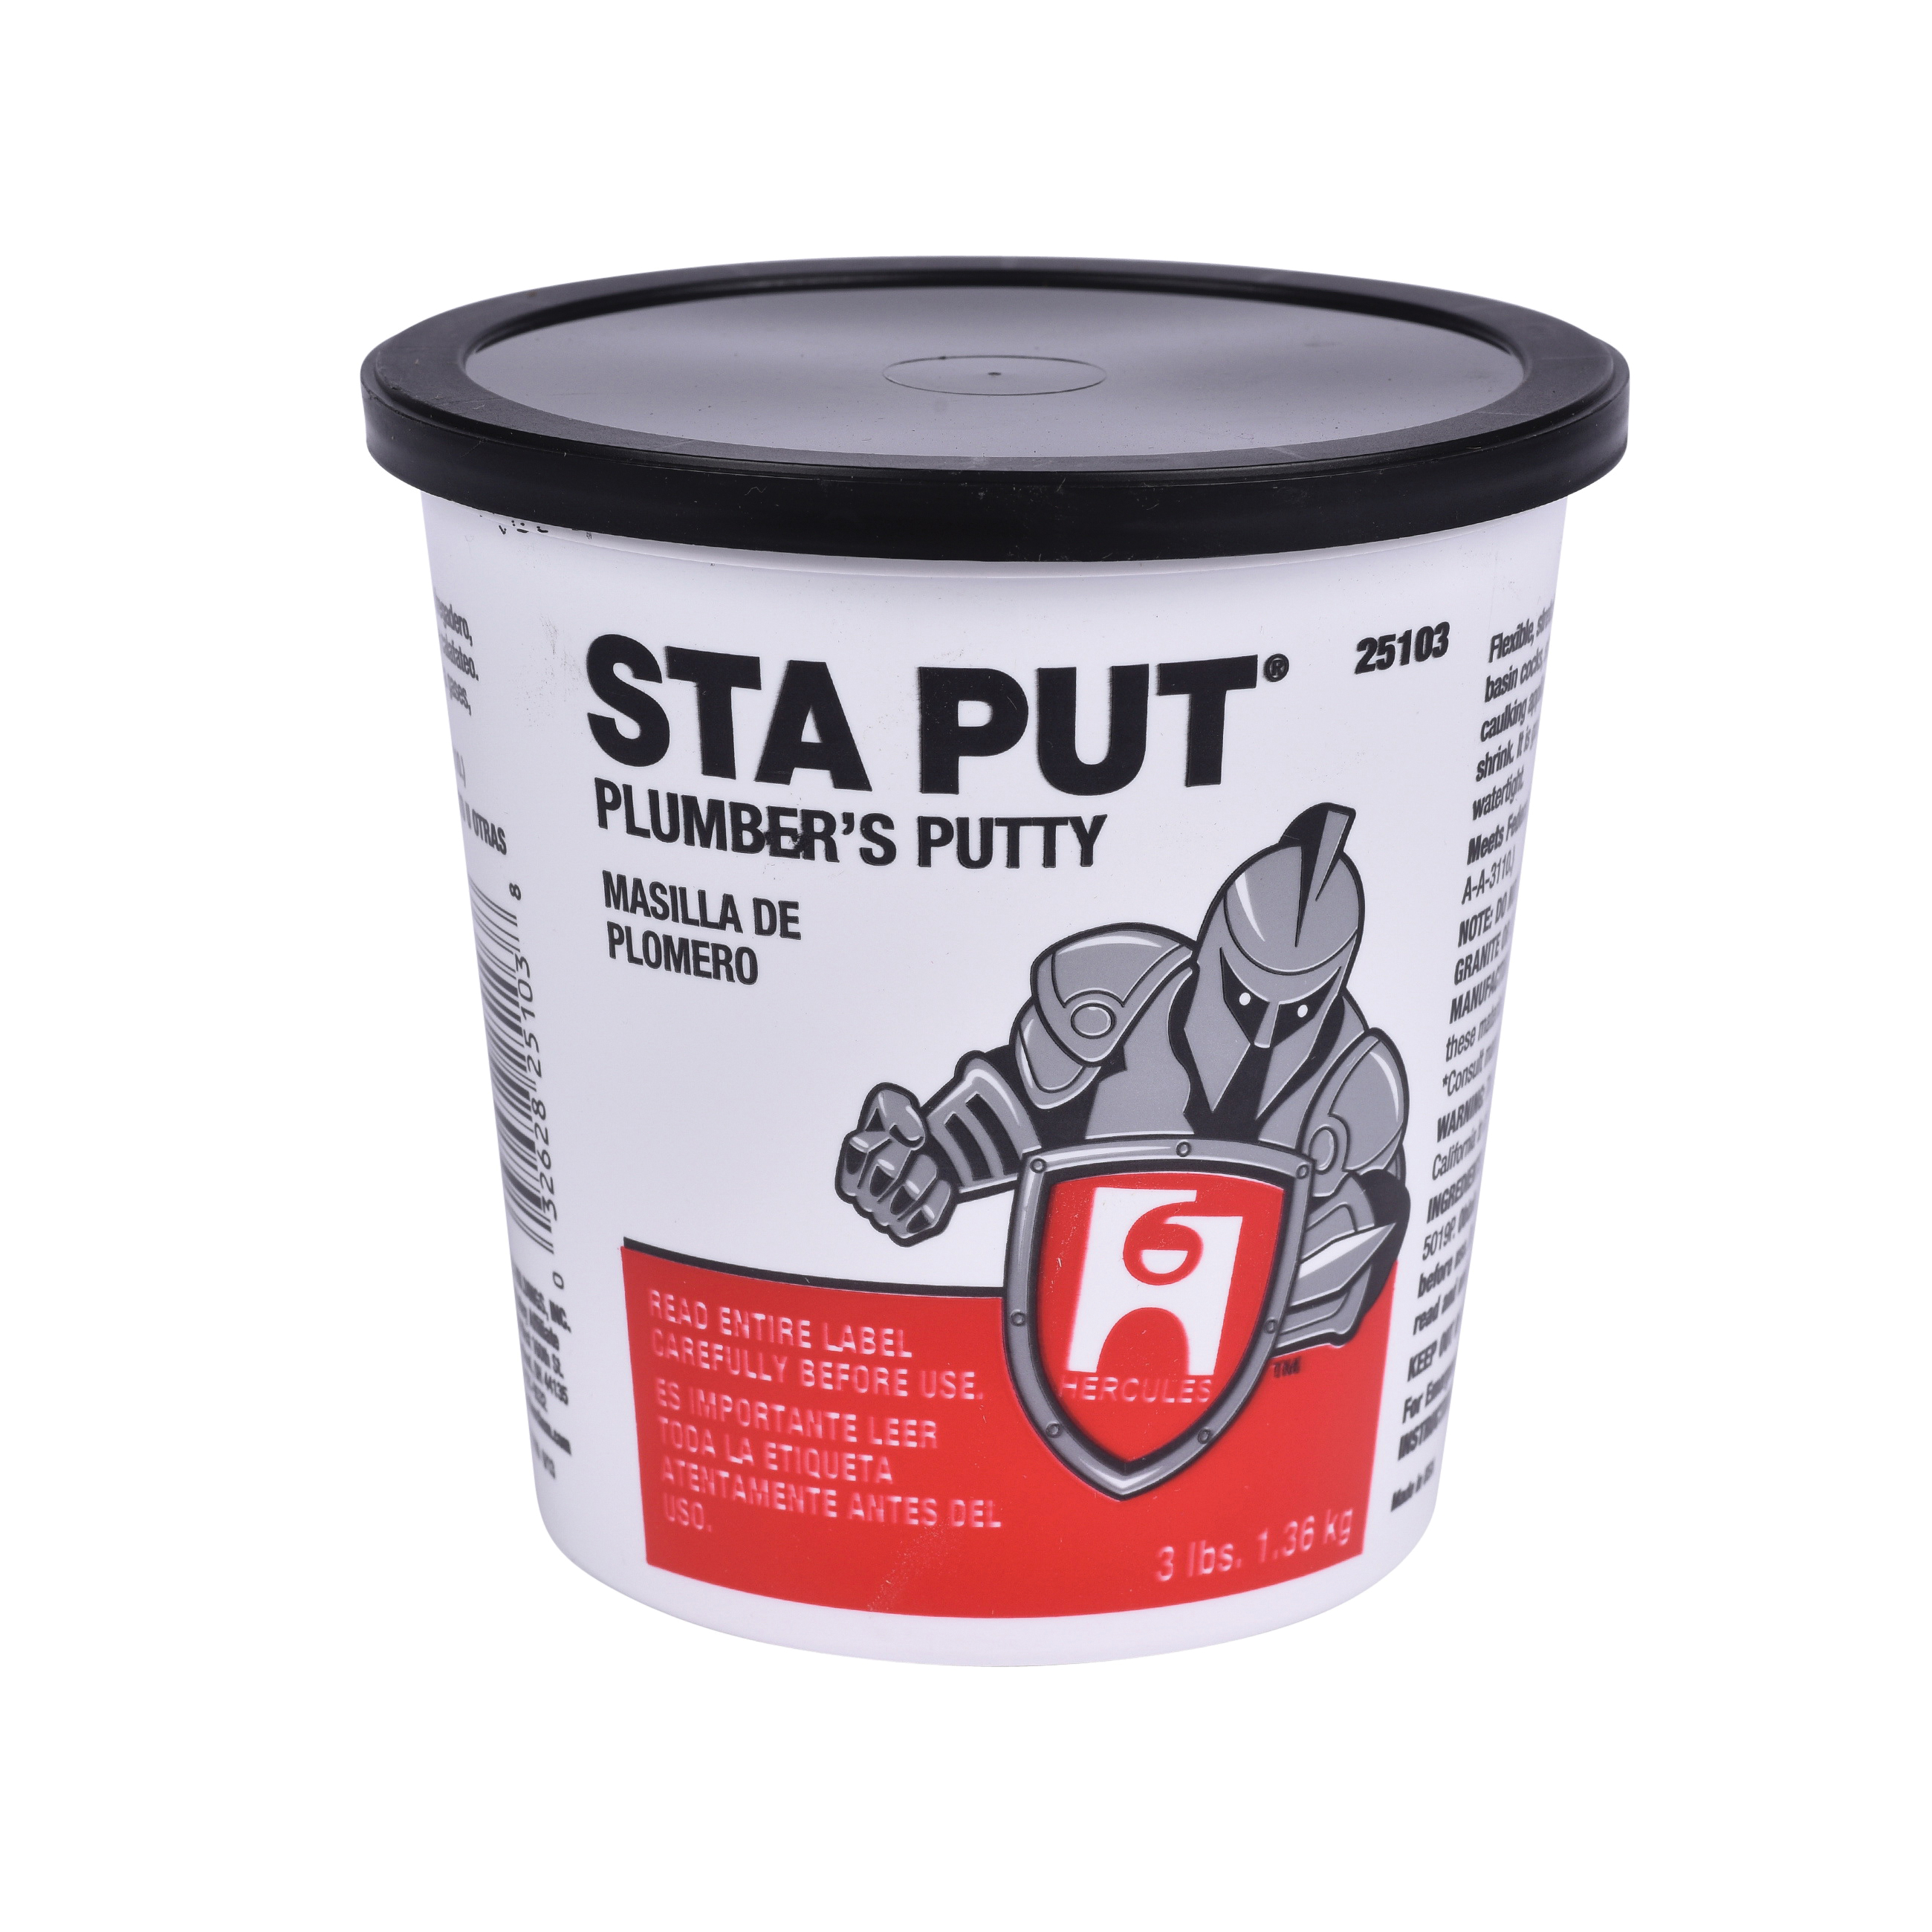 Hercules® Sta Put® 25103 Plumber's Putty, 3 lb Pail, Solid, Off-White, 2.15 to 2.35